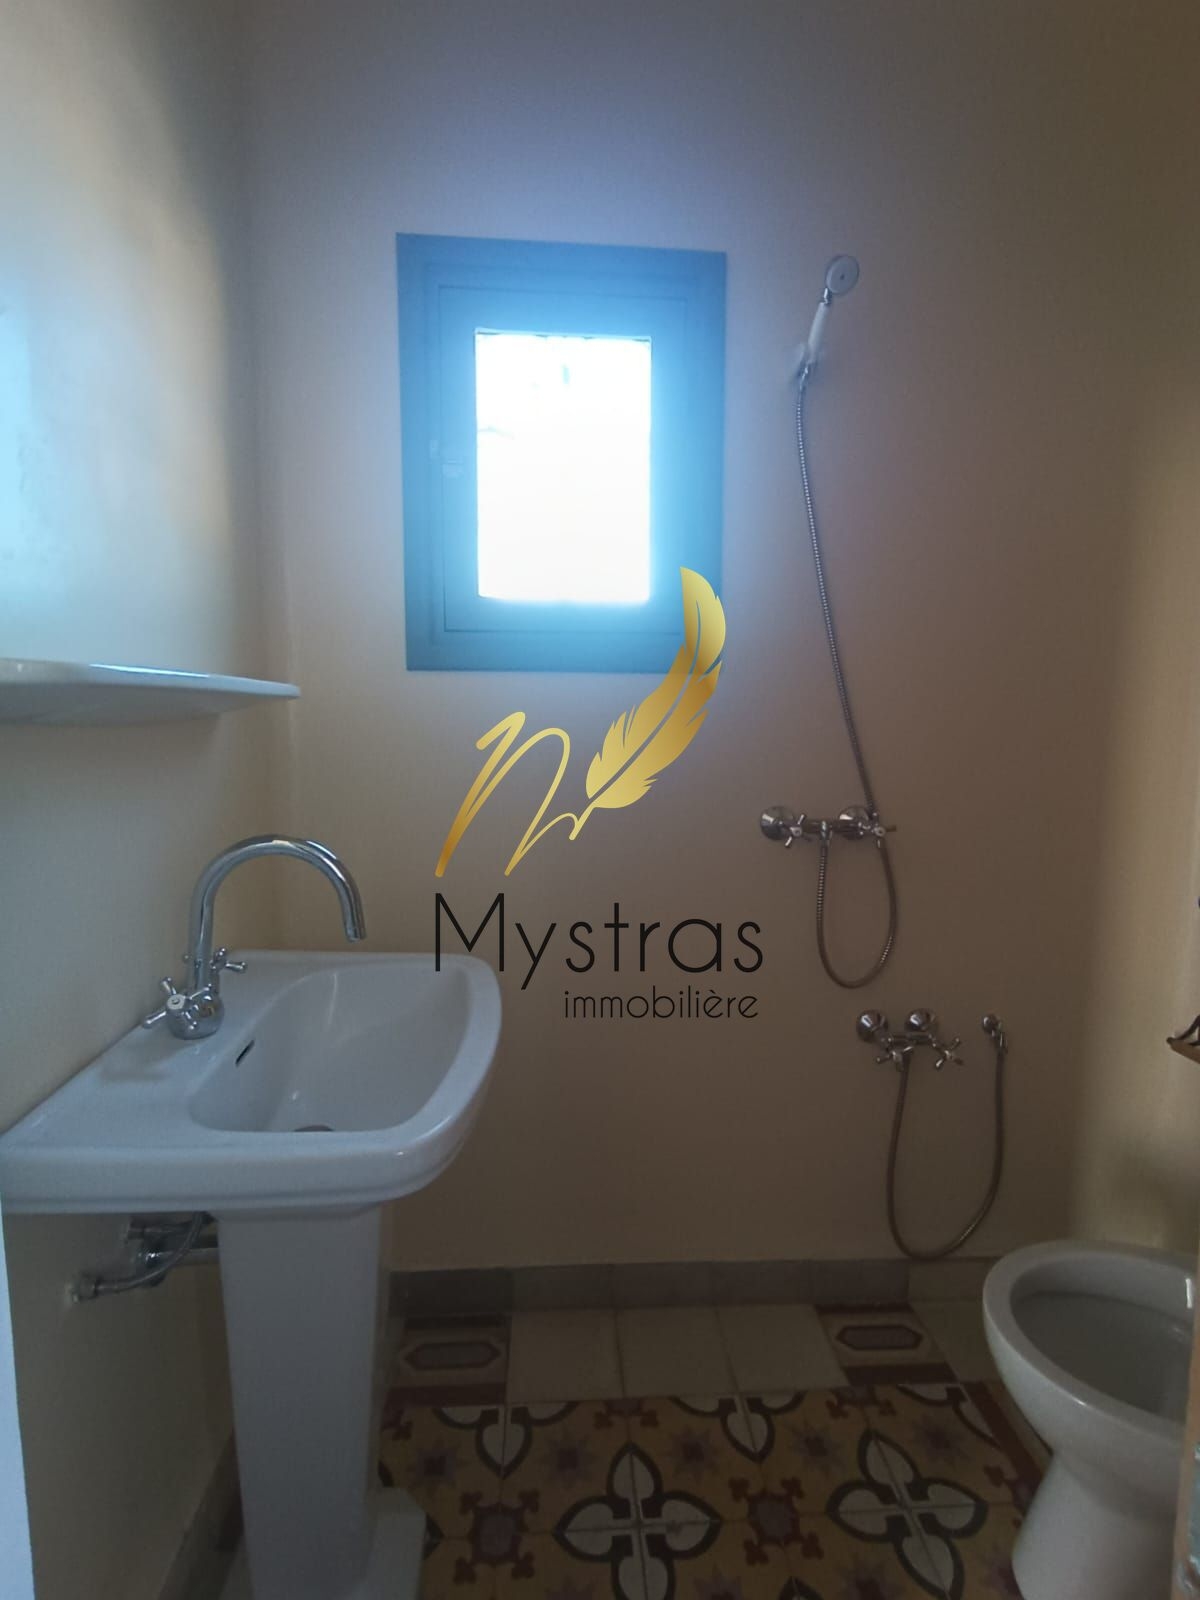 Carthage Salambo Location Appart. 2 pices Un appartement s2  carthage salammbo